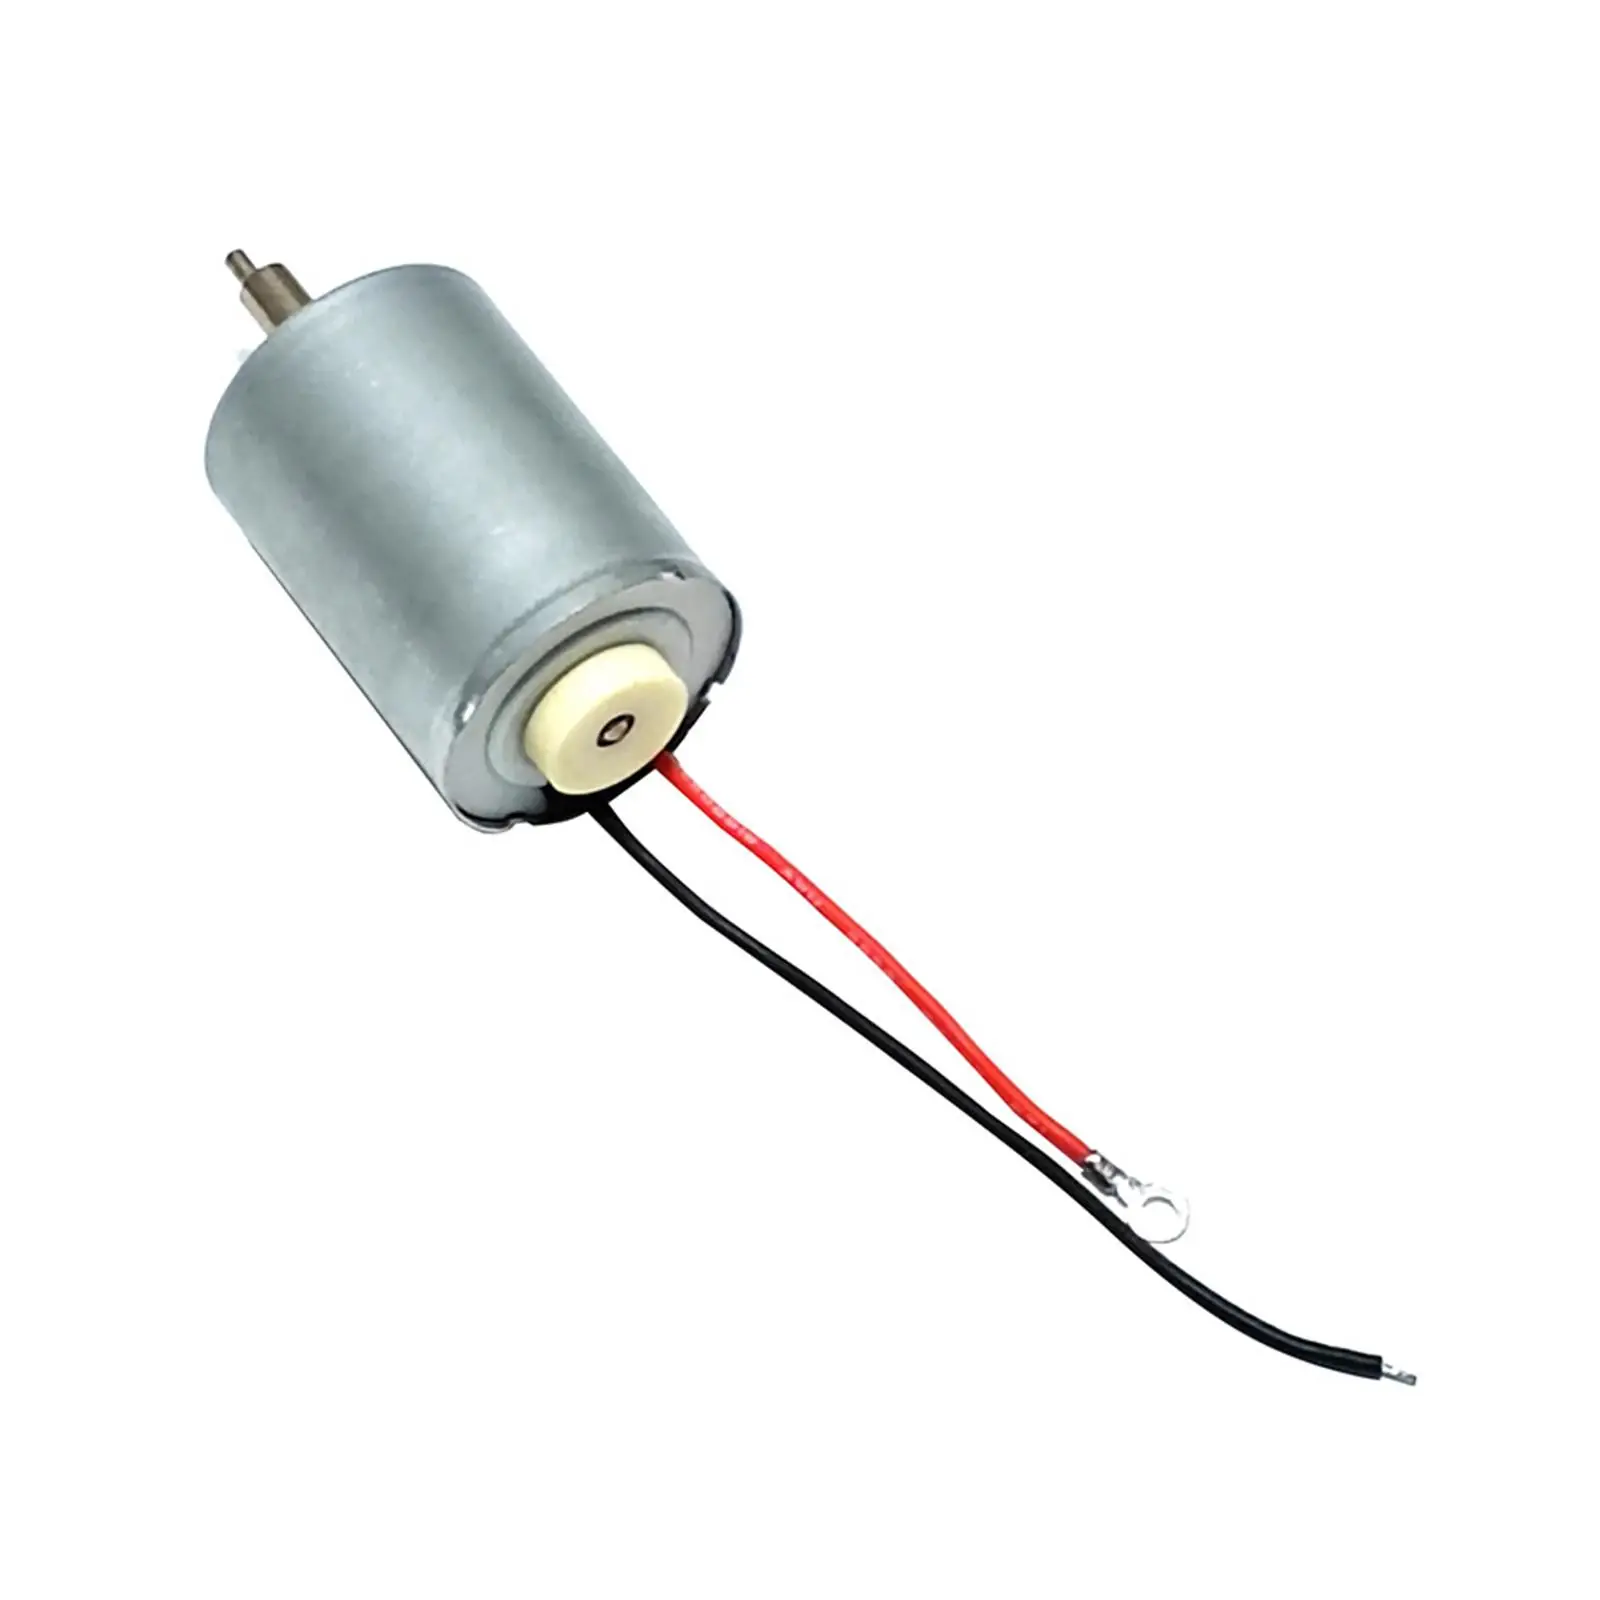 Motor for Hair Clippers Maintenance DIY High Performance Parts Upgrade Brushless Motor Rotary Motor for 8591 2245 2241 8148 2240